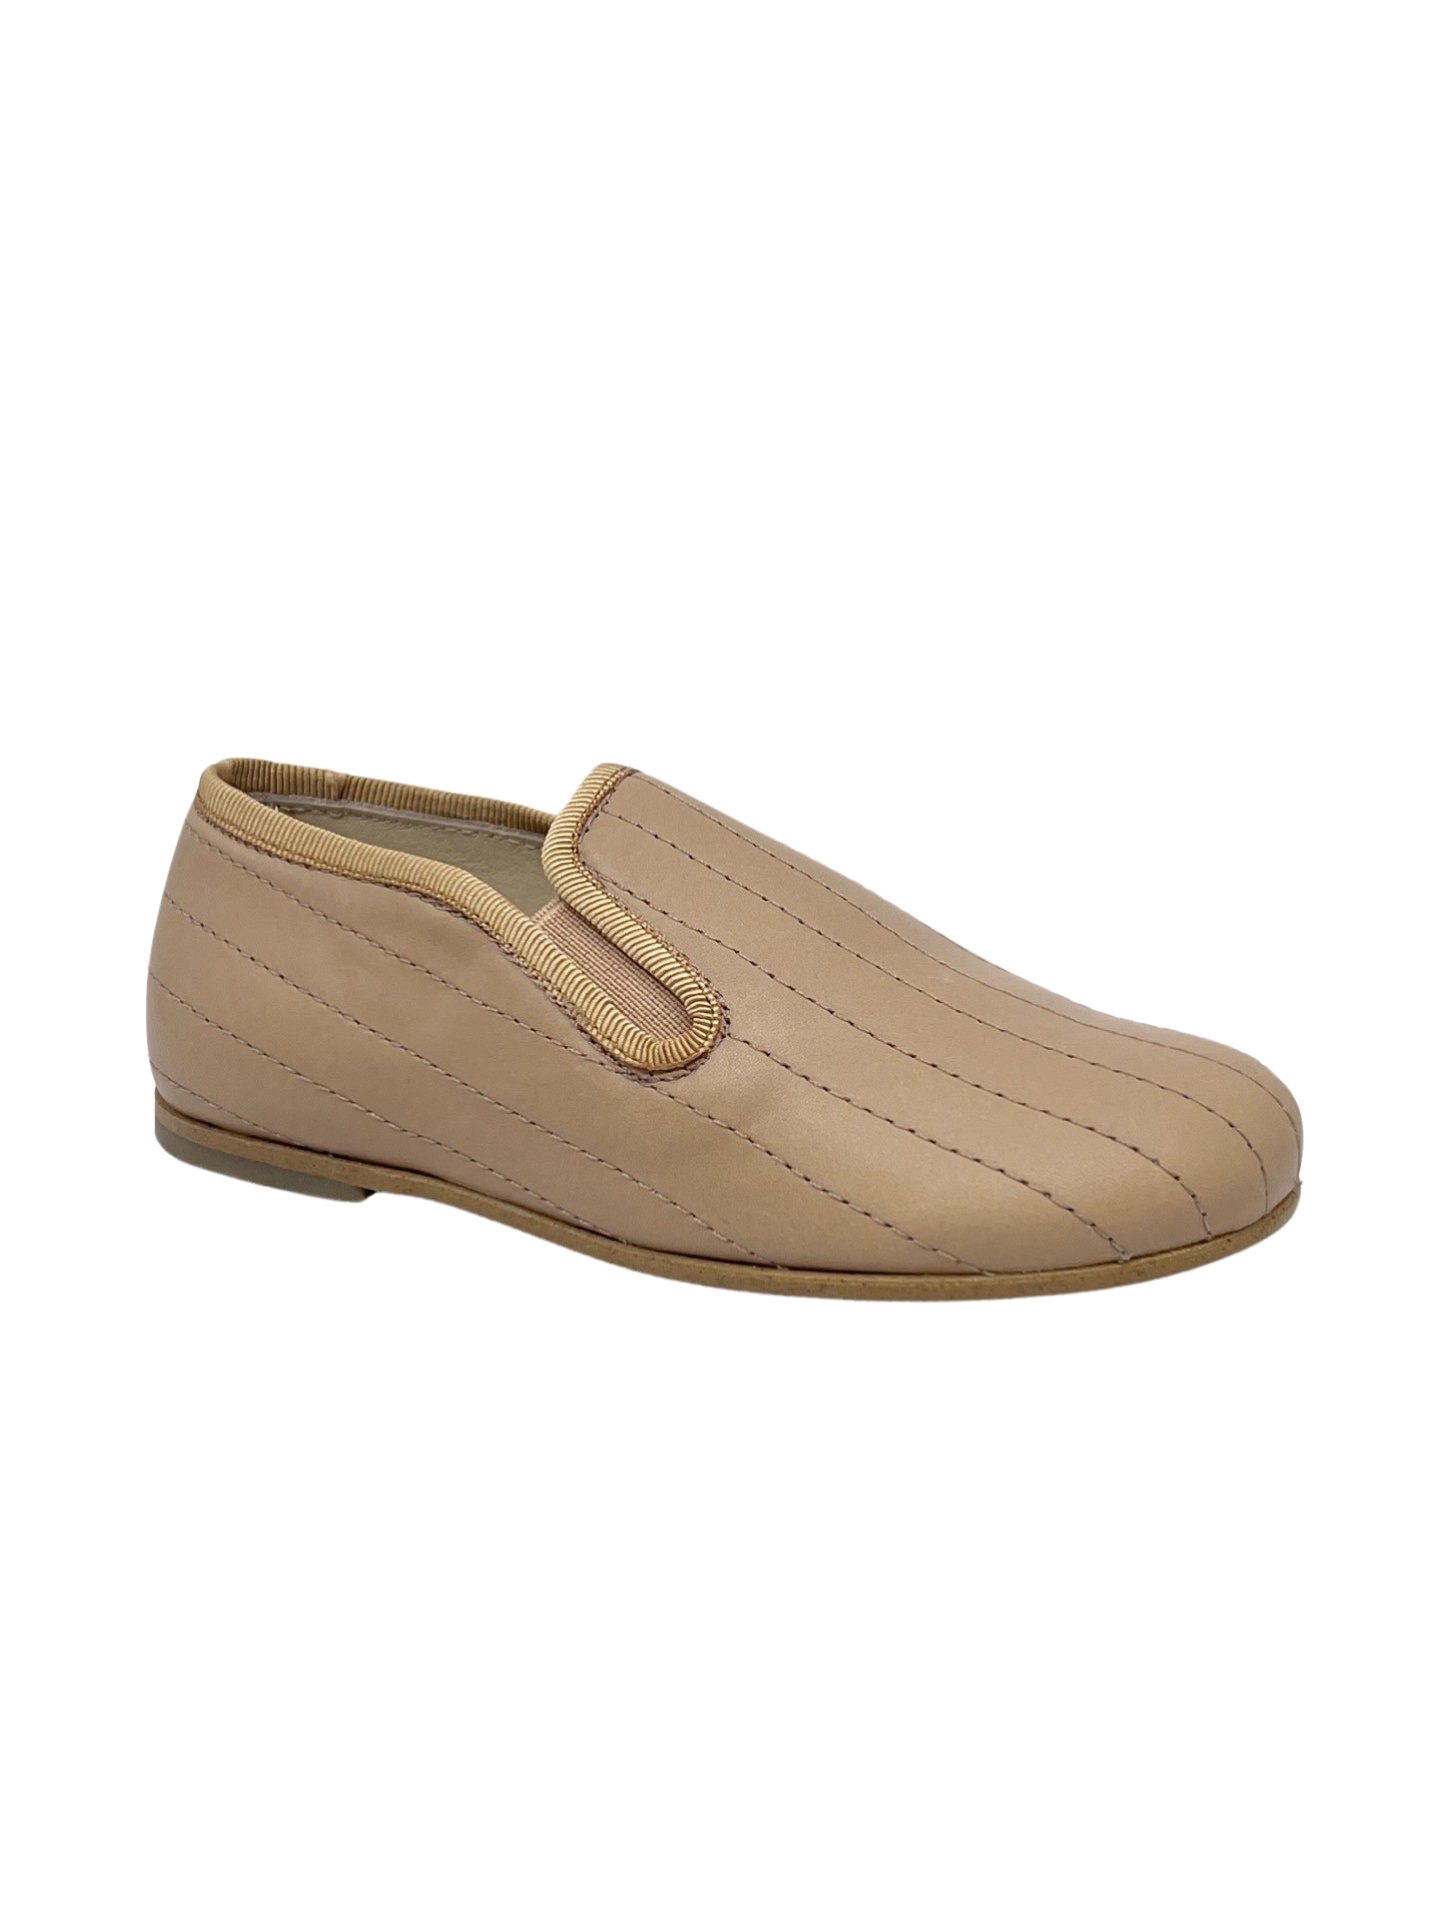 Luccini Sand Stitched Smoking Shoe